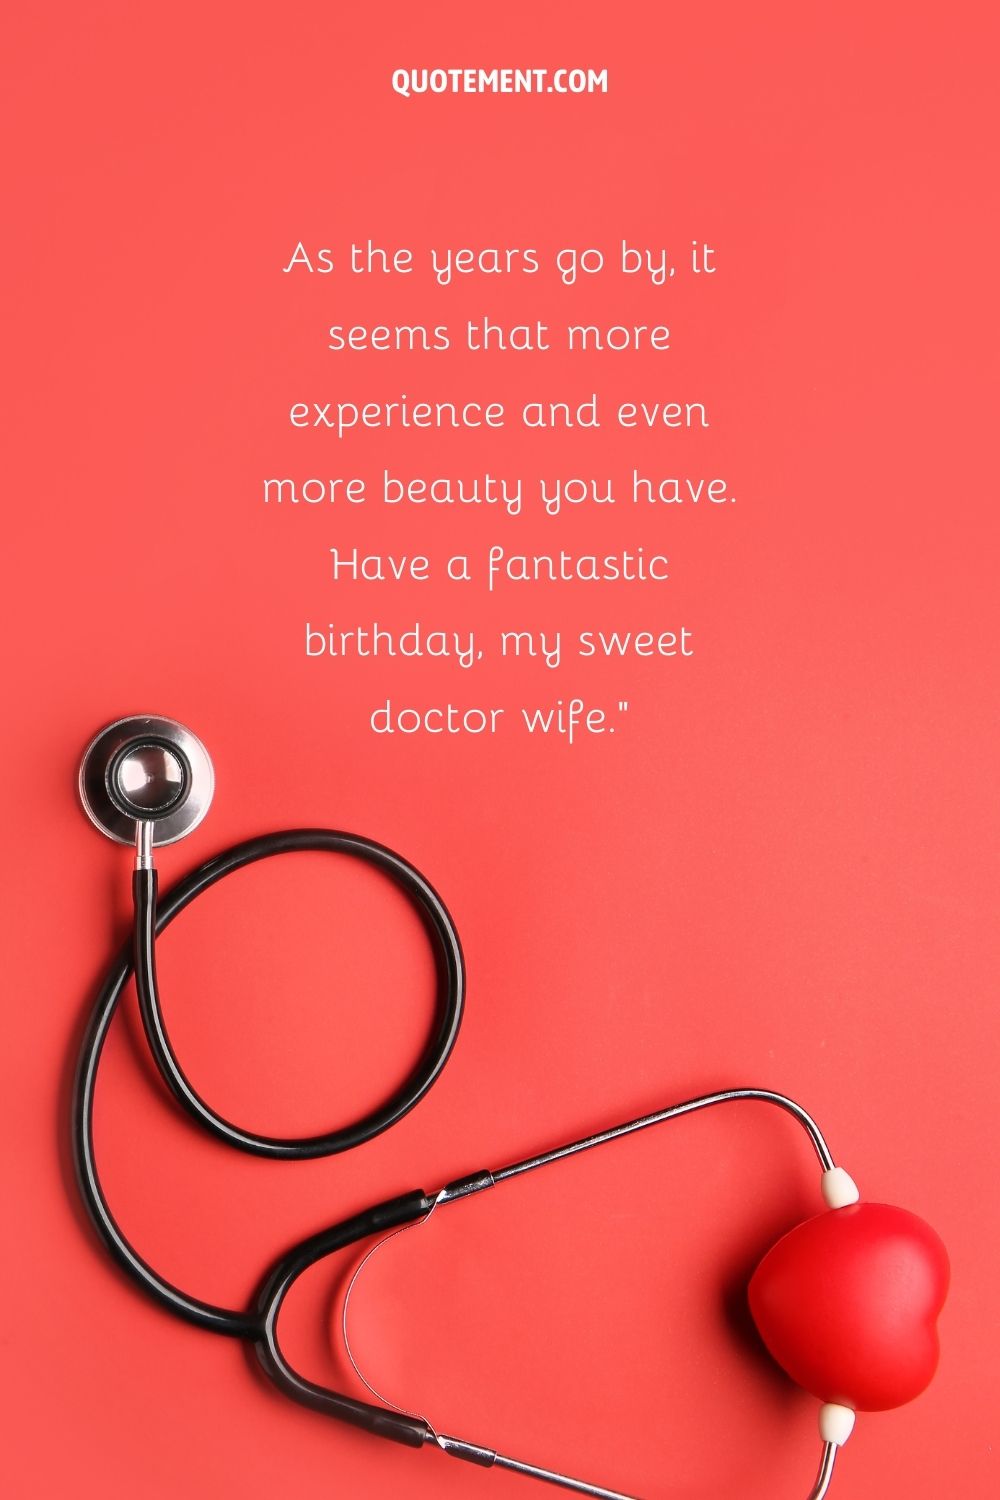 stethoscope listening to a red heart representing happy birthday wishes for doctor wife